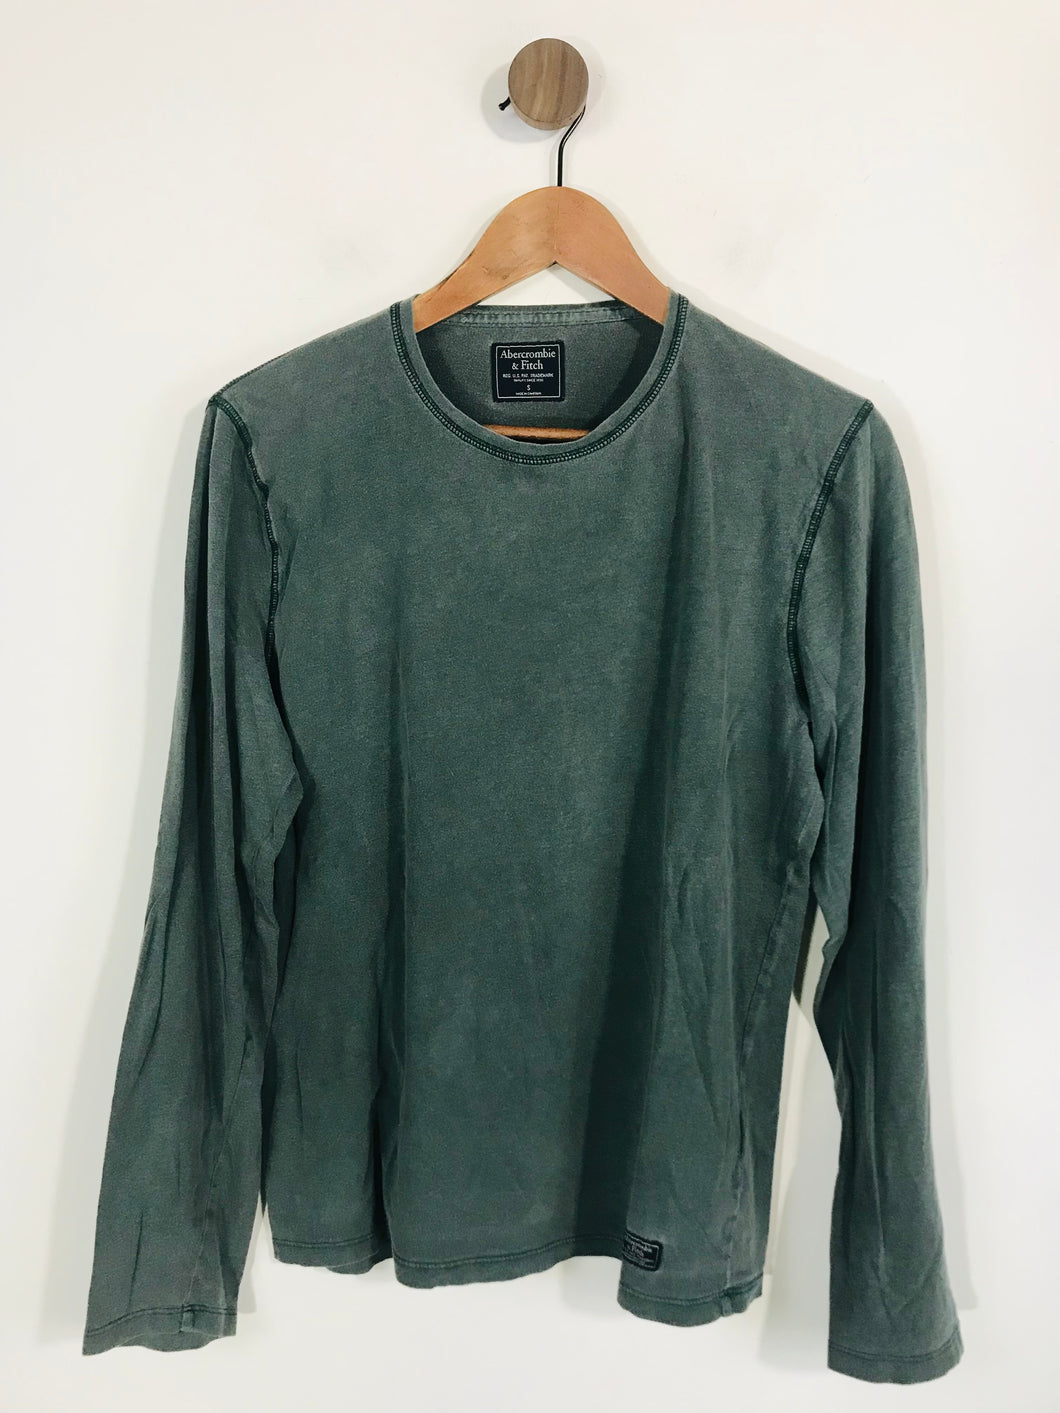 Abercrombie & Fitch Men's Long Sleeve Cotton T-Shirt | S | Green